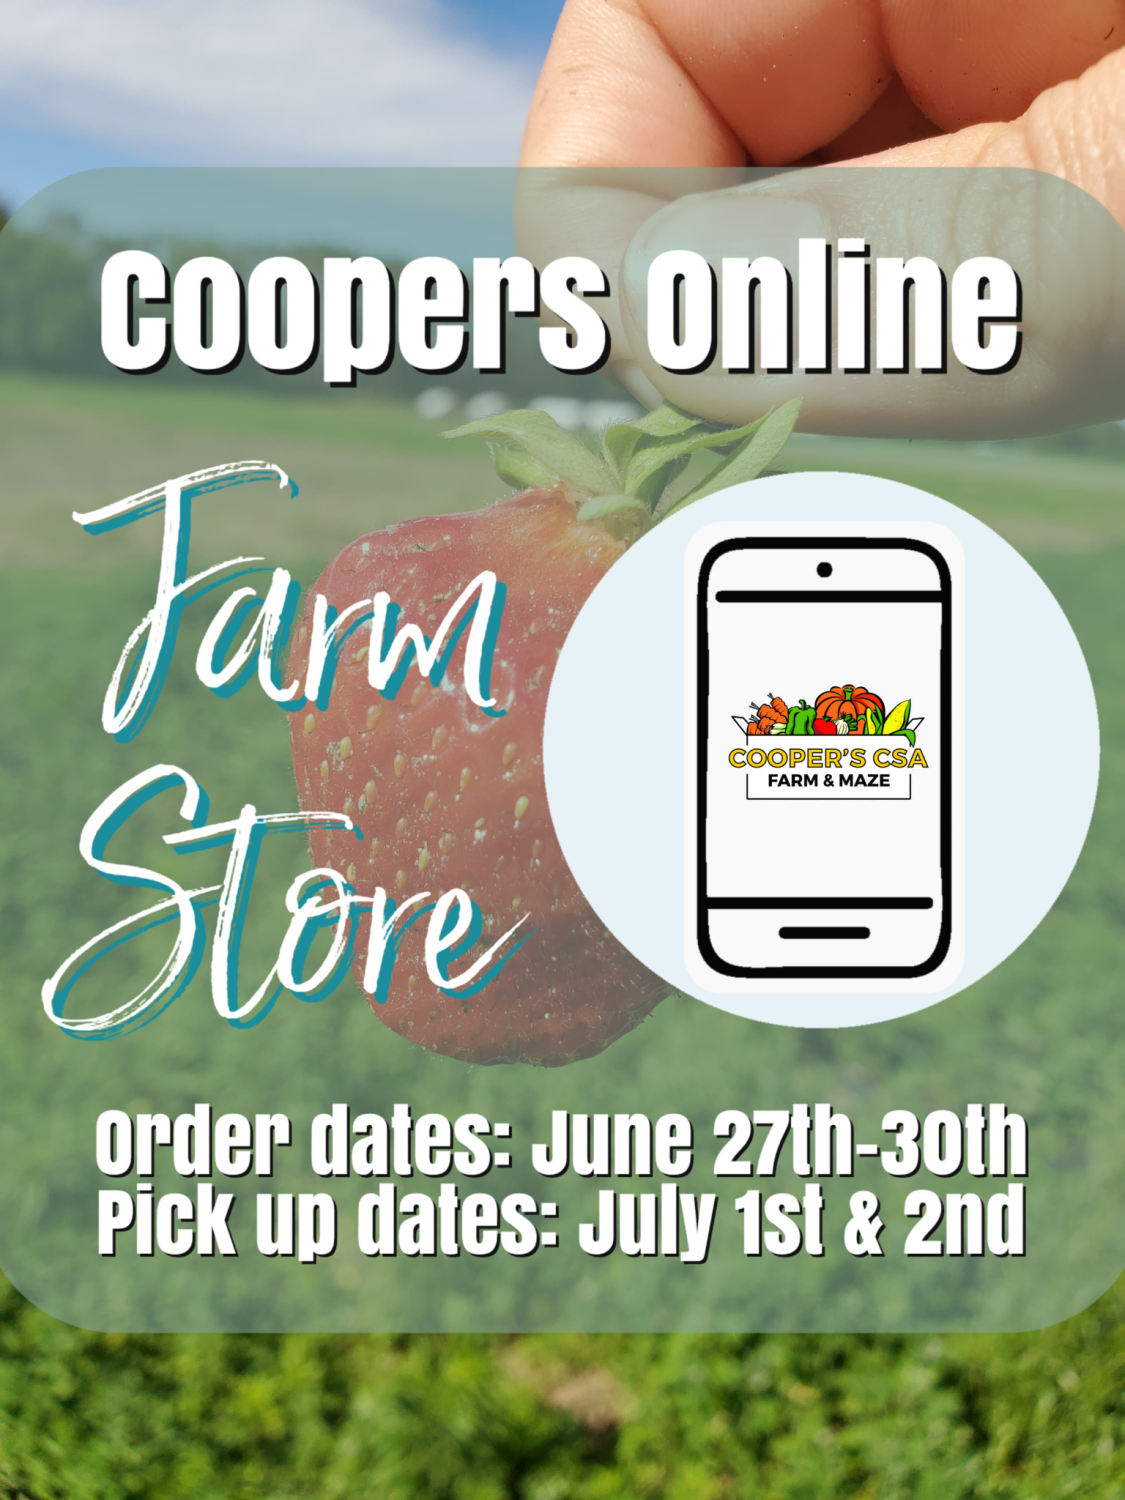 Next Happening: Coopers Online Farm Stand- Order week June 27th-July 2nd